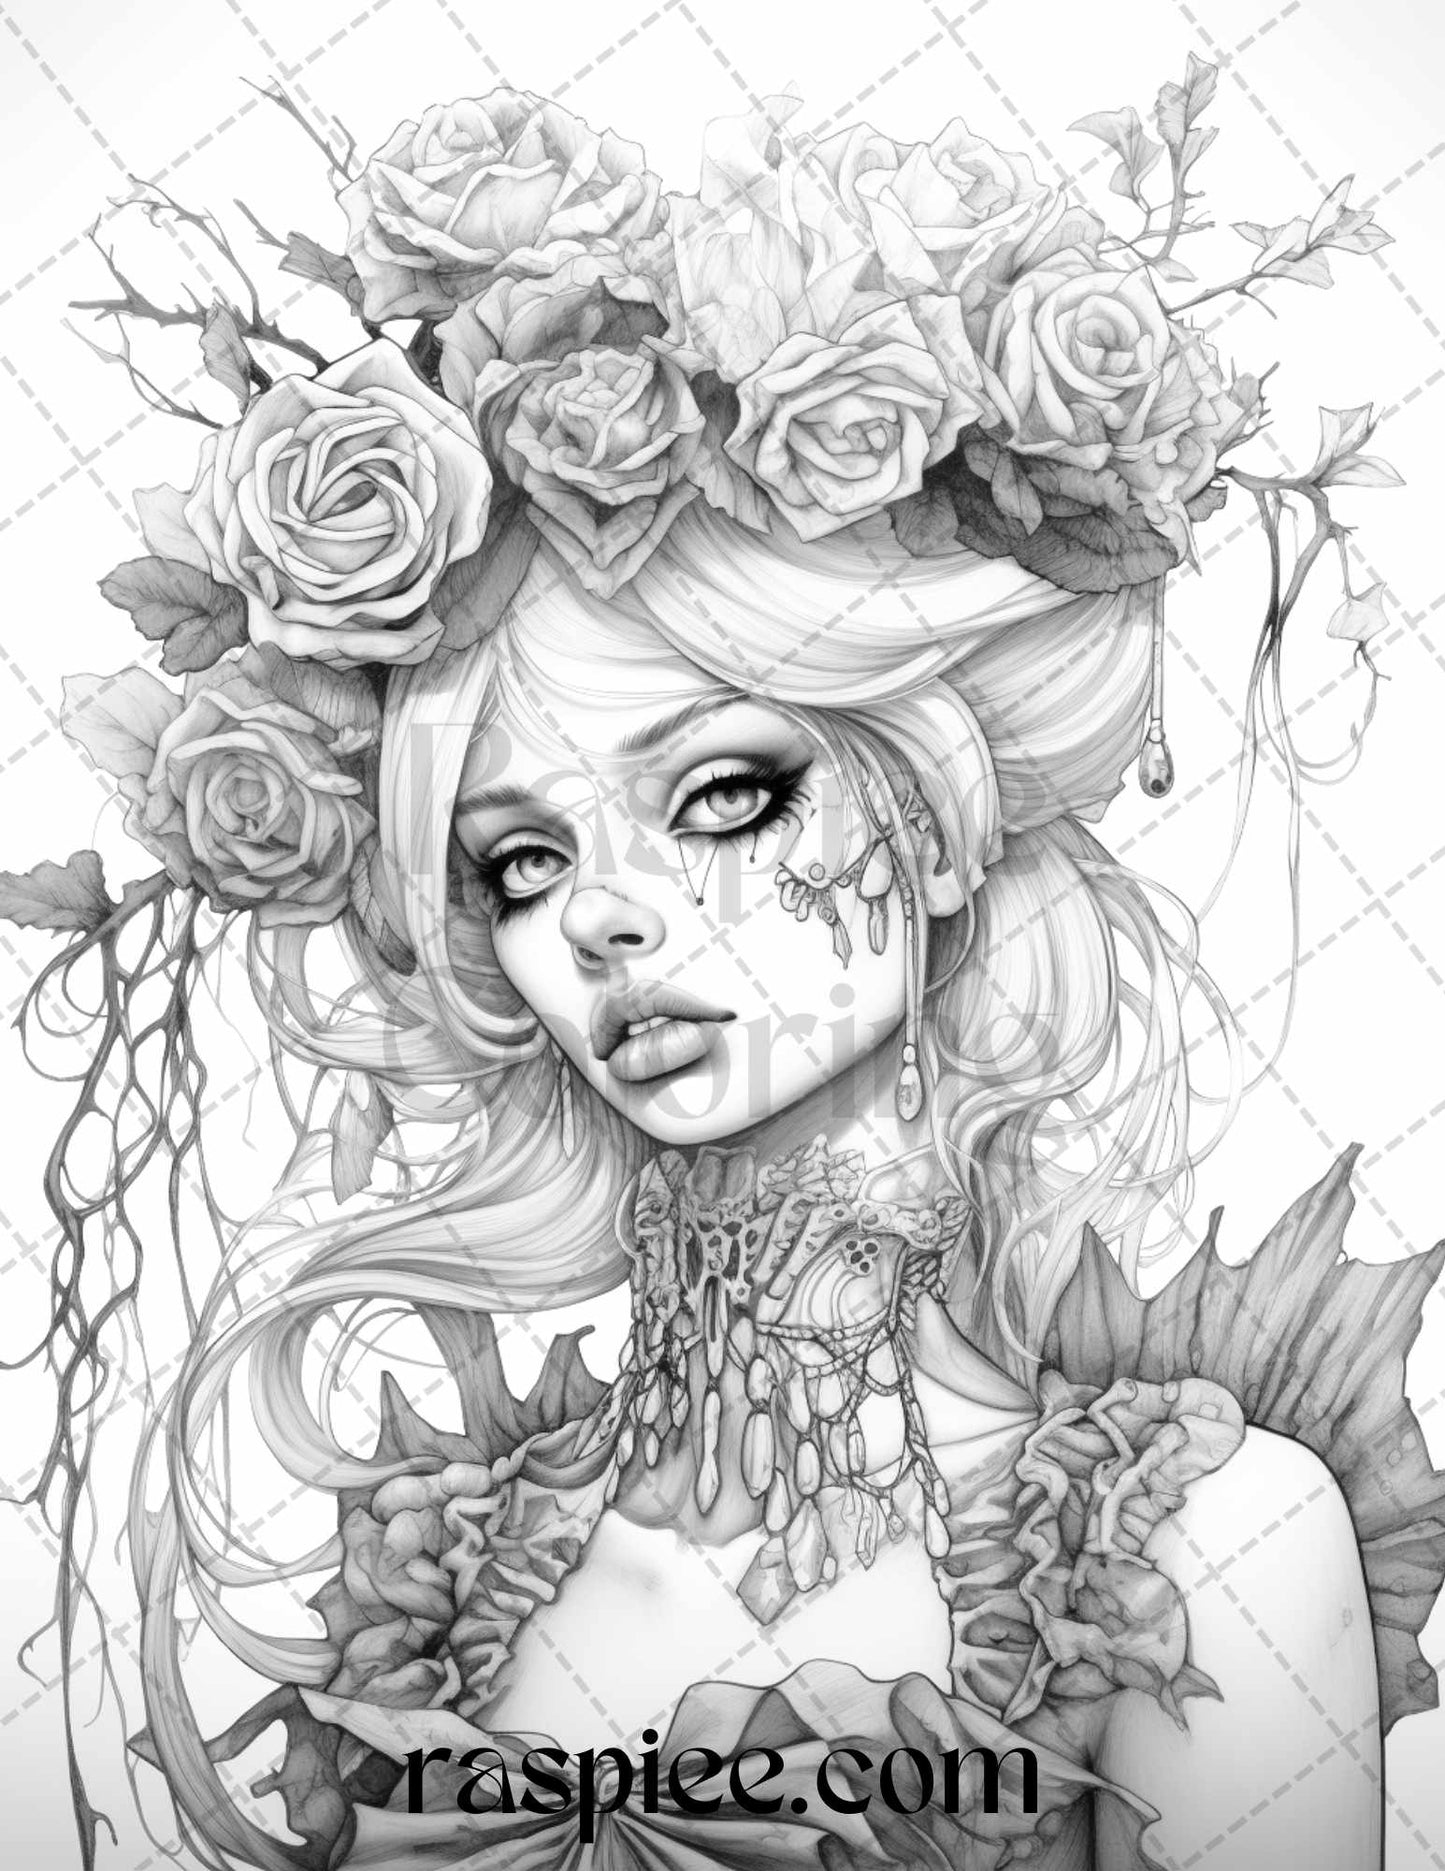 Halloween Zombie Fairy Coloring Page, Grayscale Coloring Printable, Adult Coloring Art, Scary Gothic Coloring, Halloween Decor DIY, Printable Coloring Book, Ghostly Coloring Sheet, Halloween Home Decor, Gothic Fairyland Printable, Halloween Coloring Pages for Adults